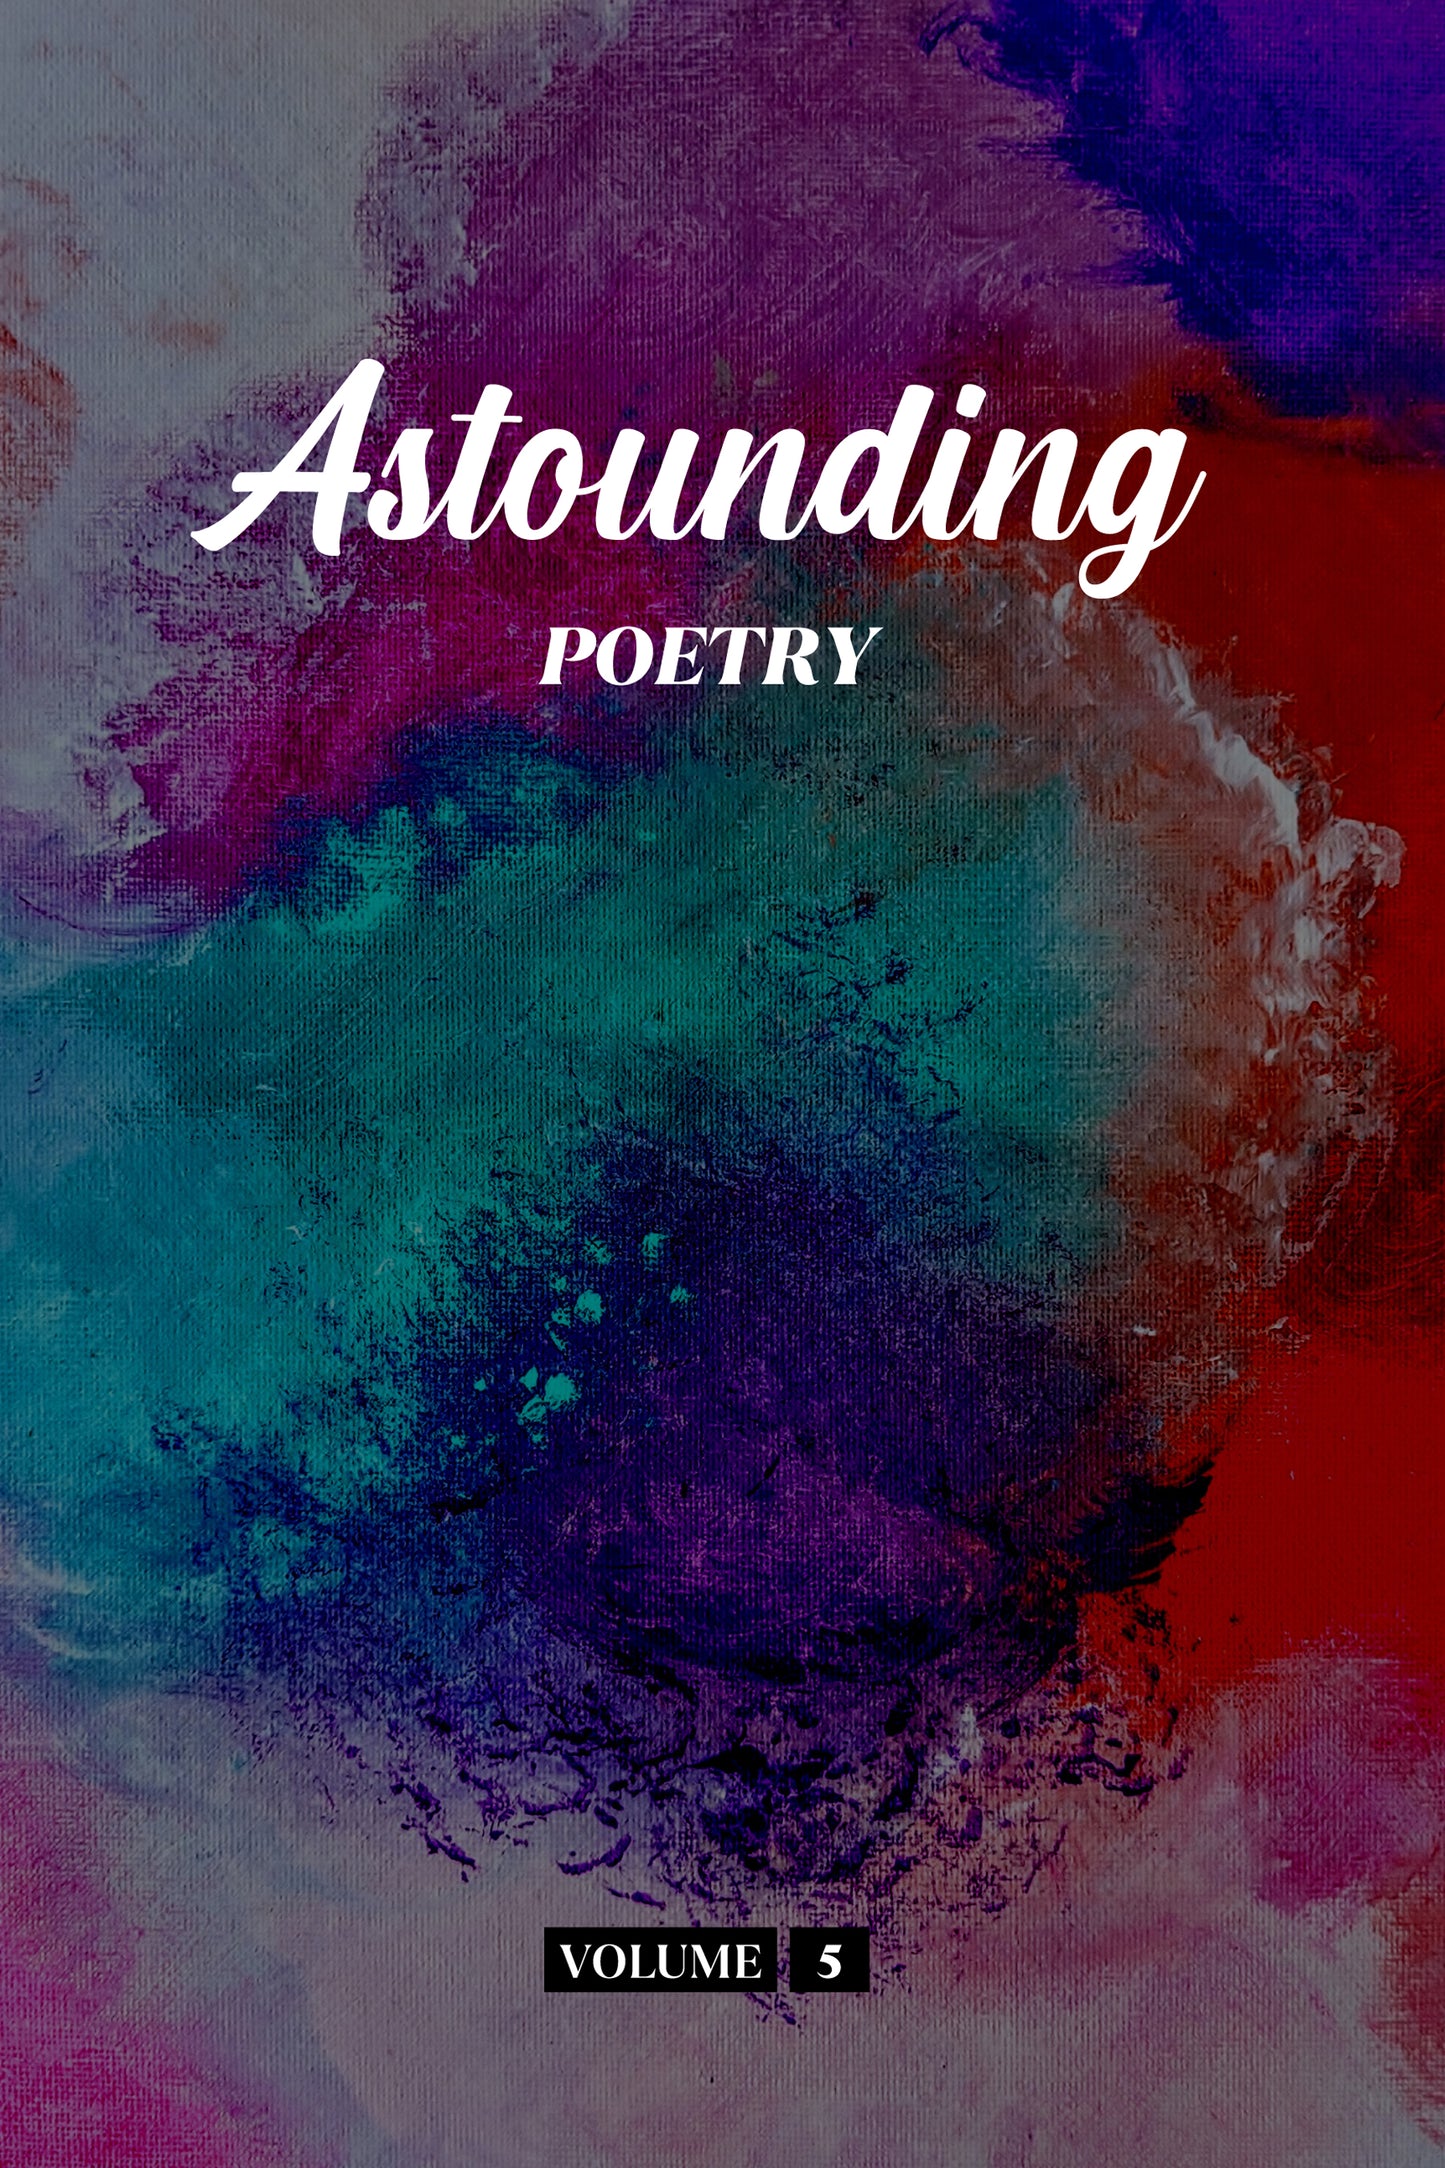 Astounding Poetry (Volume 5) - Physical Book